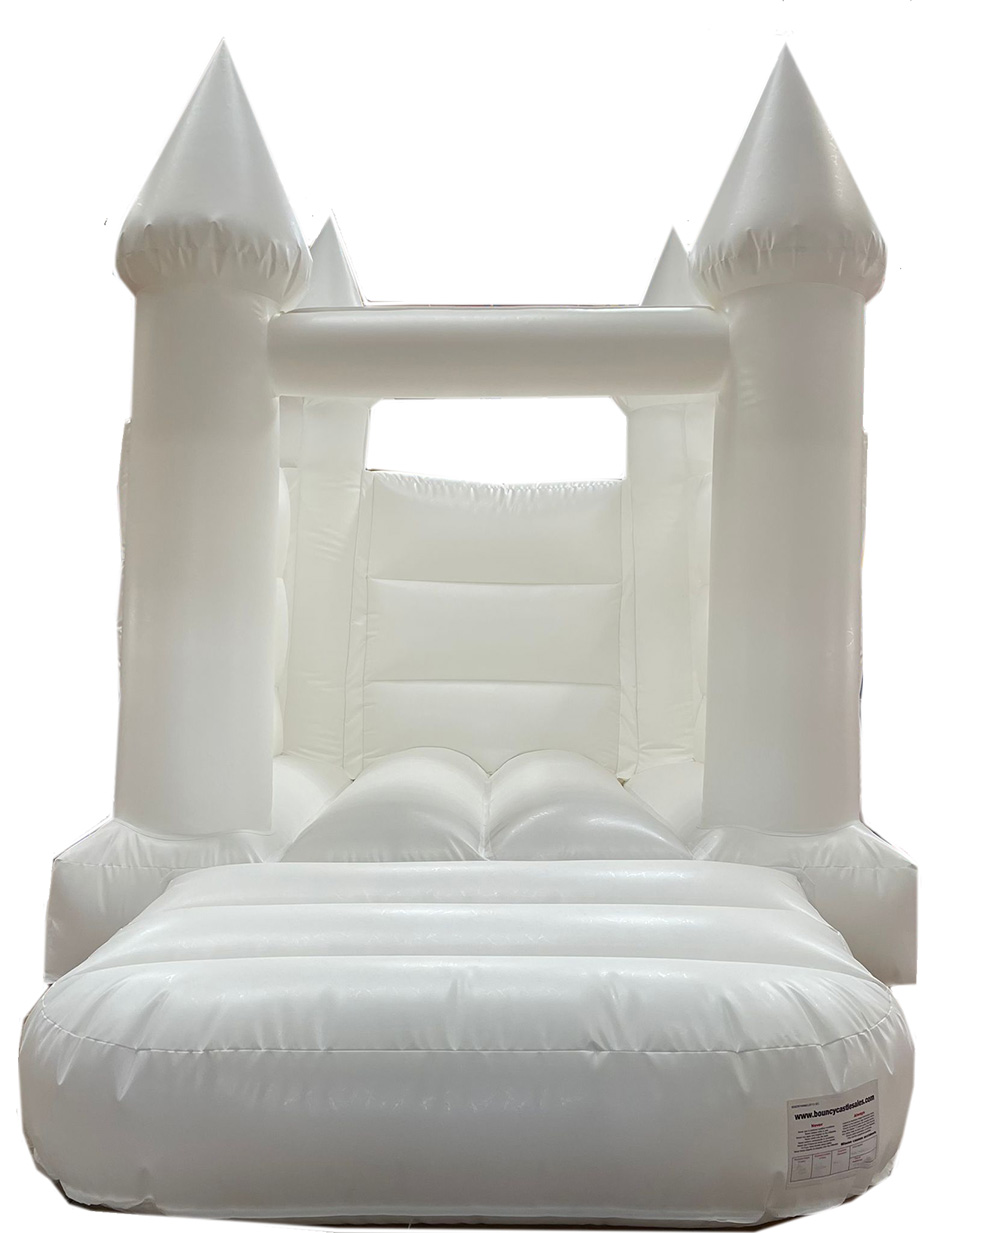 Bouncy Castle Sales - BC627 - Bouncy Inflatable for sale